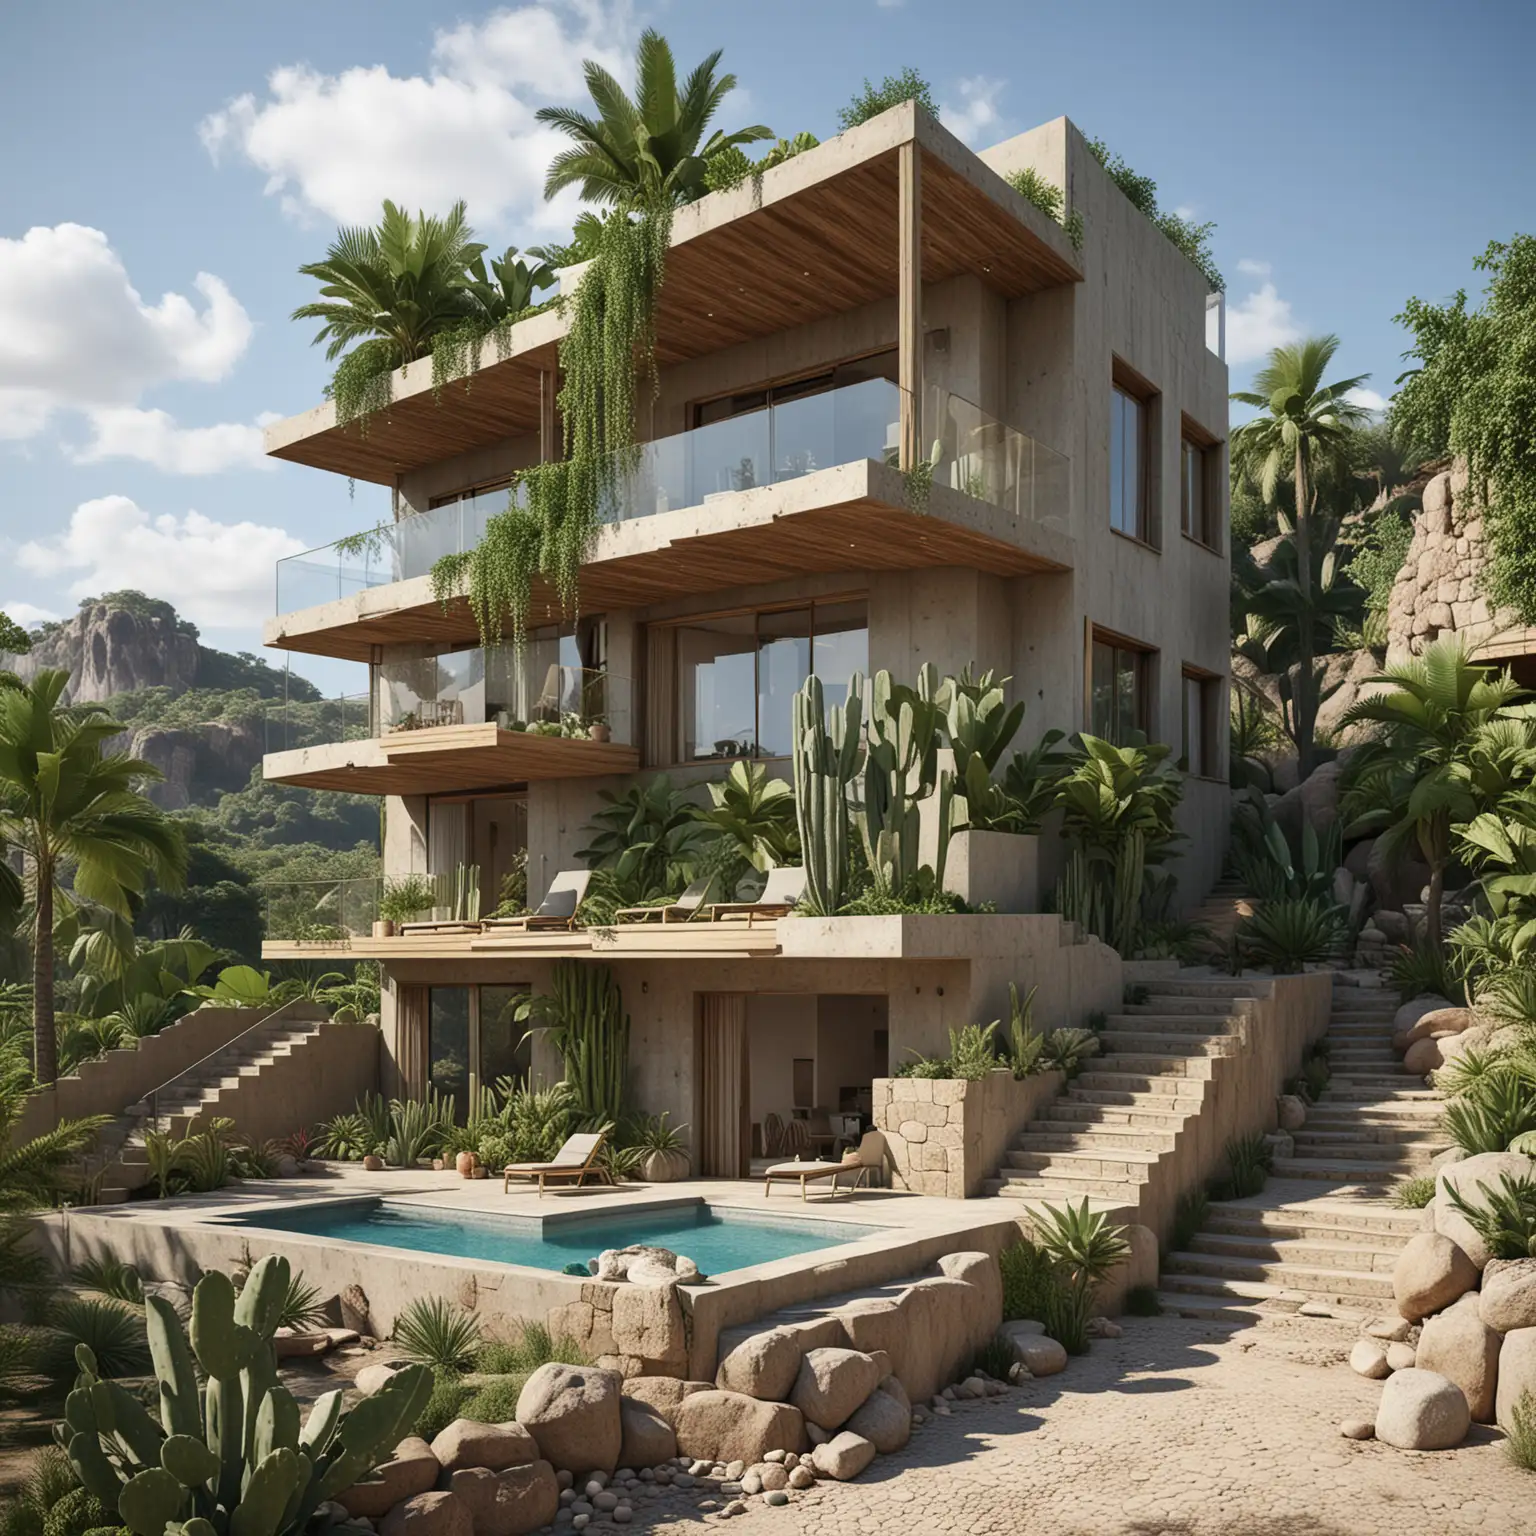 create a small apartment with 1  with 5-6 units in a tropical city setting with cactus and tropics using vernacular architecture principles of wood, cement, and natural stones. the building will be in a city setting like Rio or nairobi and on a hill near a road. it irregularly shaped or have one unit with 2 floors and a separate unit further down. use natural stone elements. the plot is not very big so has to include 3 floors and enough outdoor space for each unit. ensure beautiful landscaping and a pool for all to use